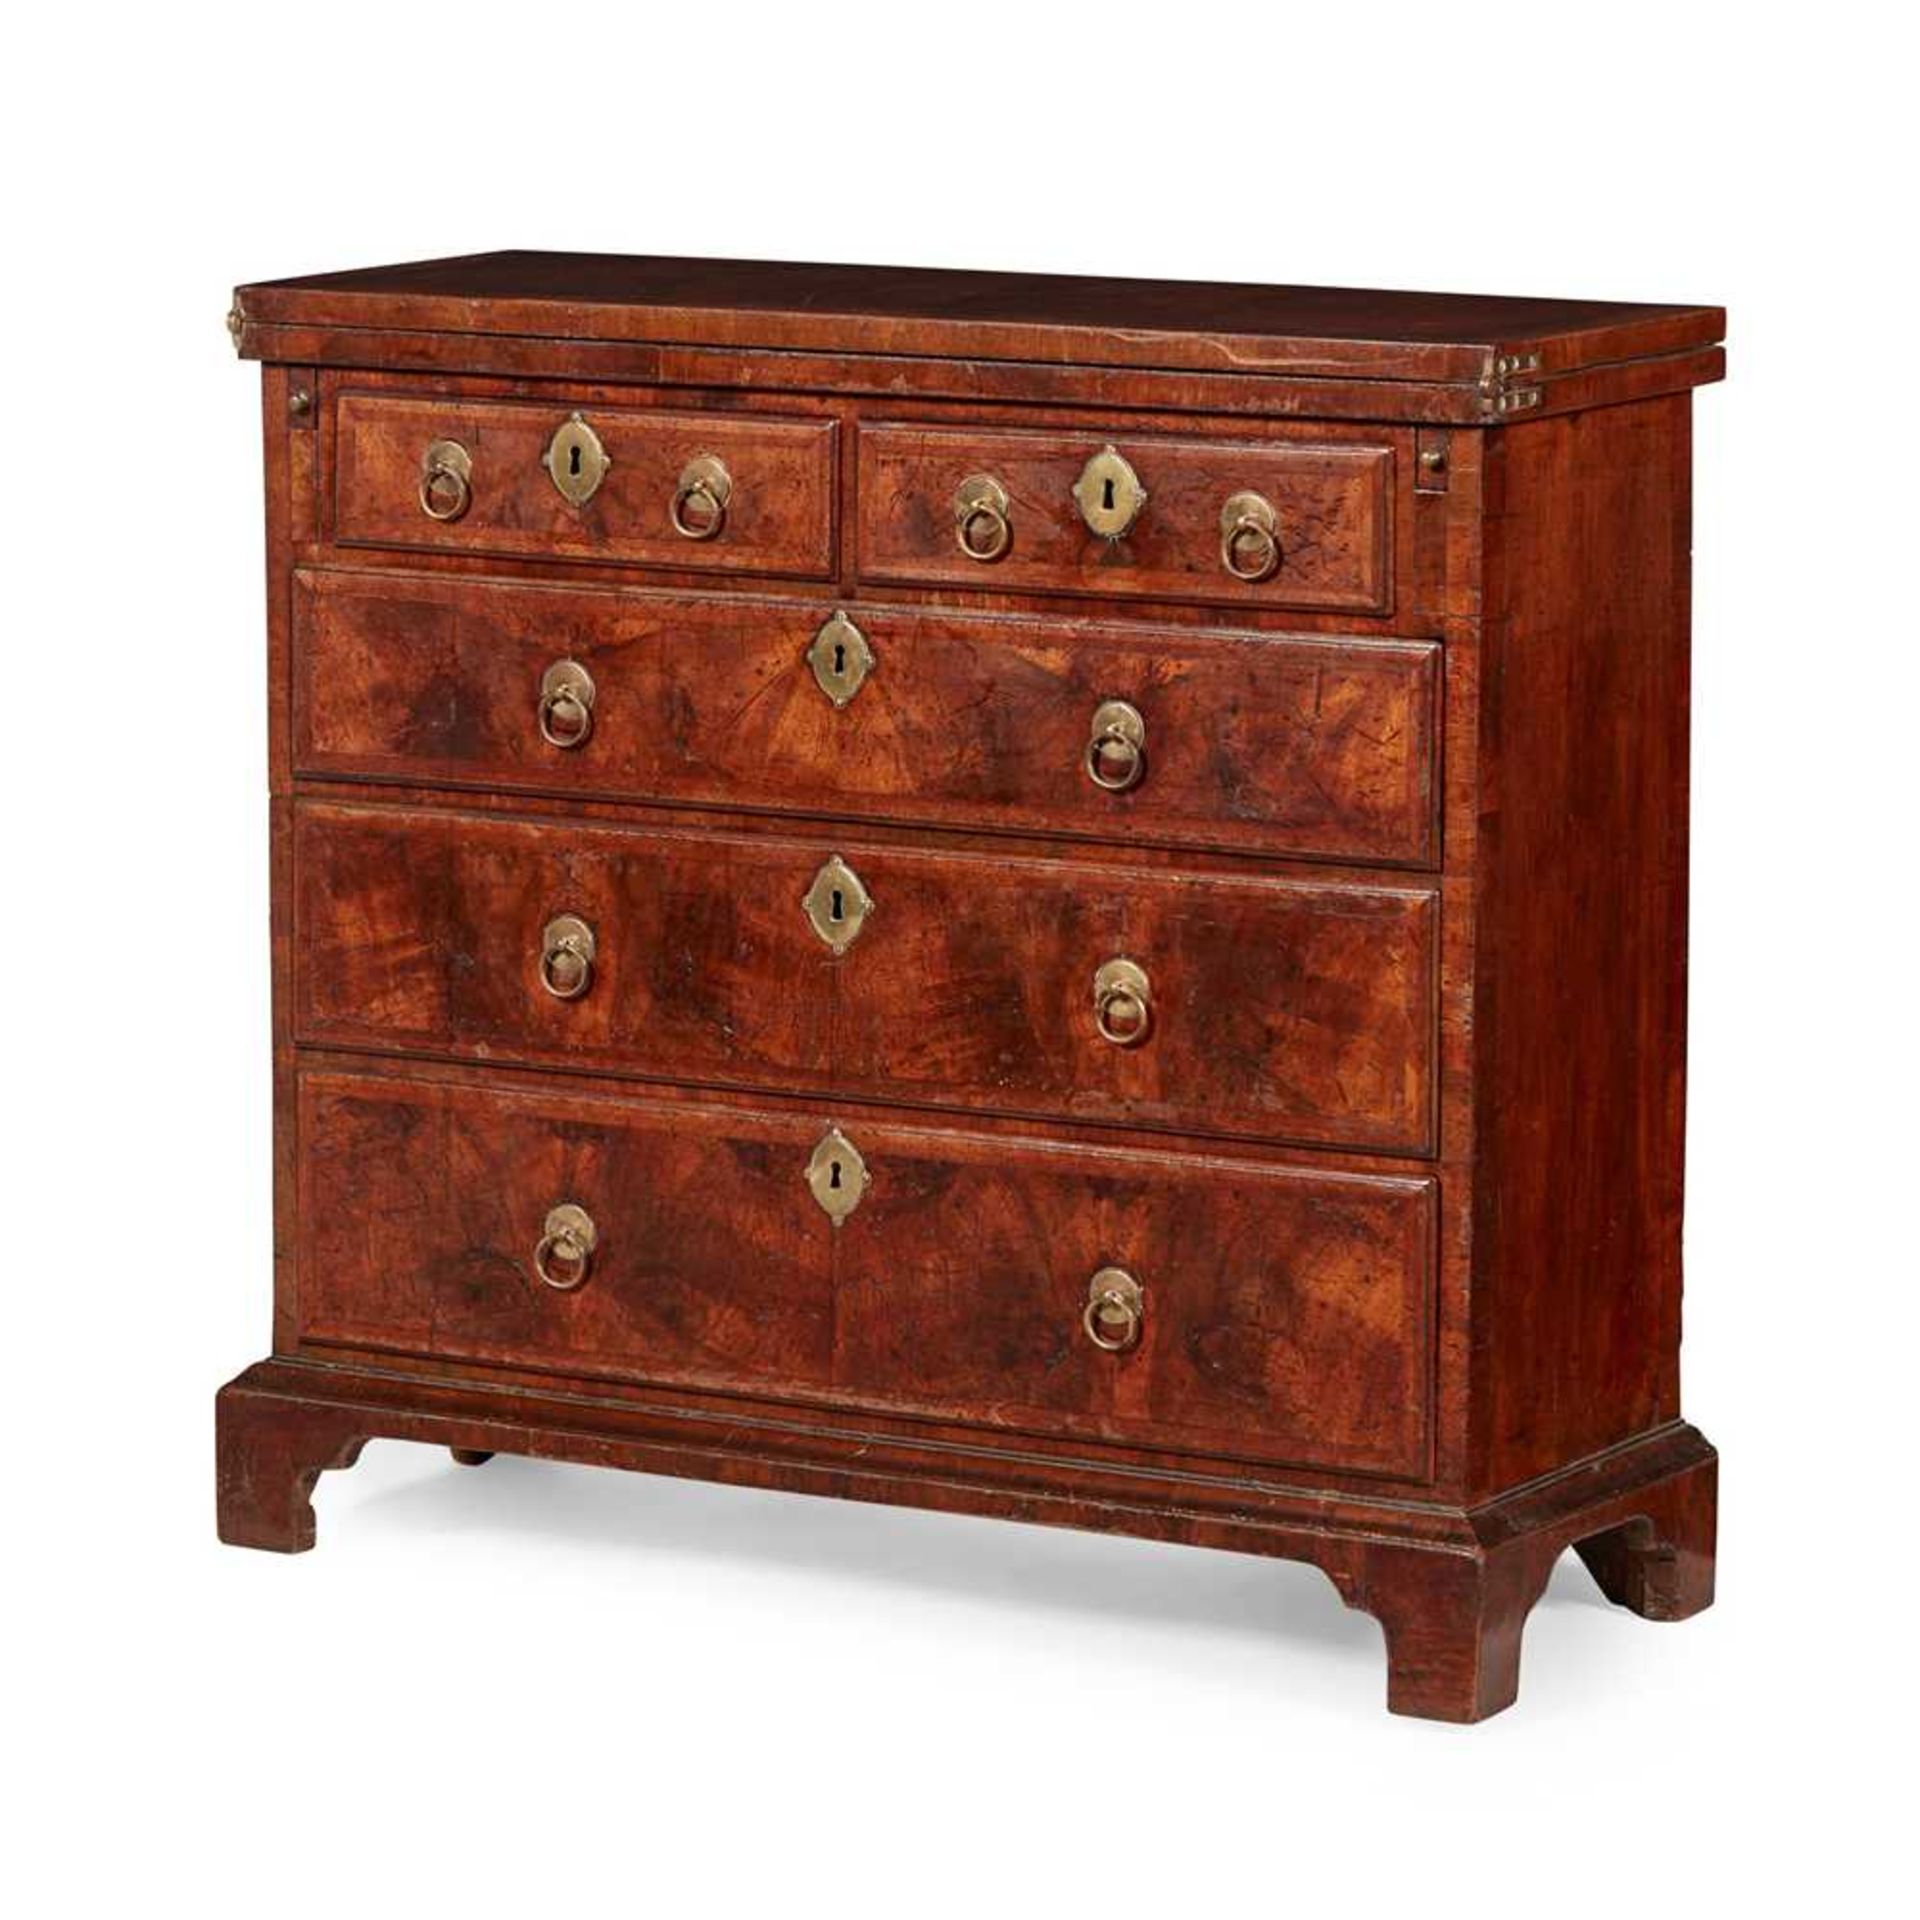 GEORGE I WALNUT BACHELOR'S CHEST OF DRAWERS EARLY 18TH CENTURY